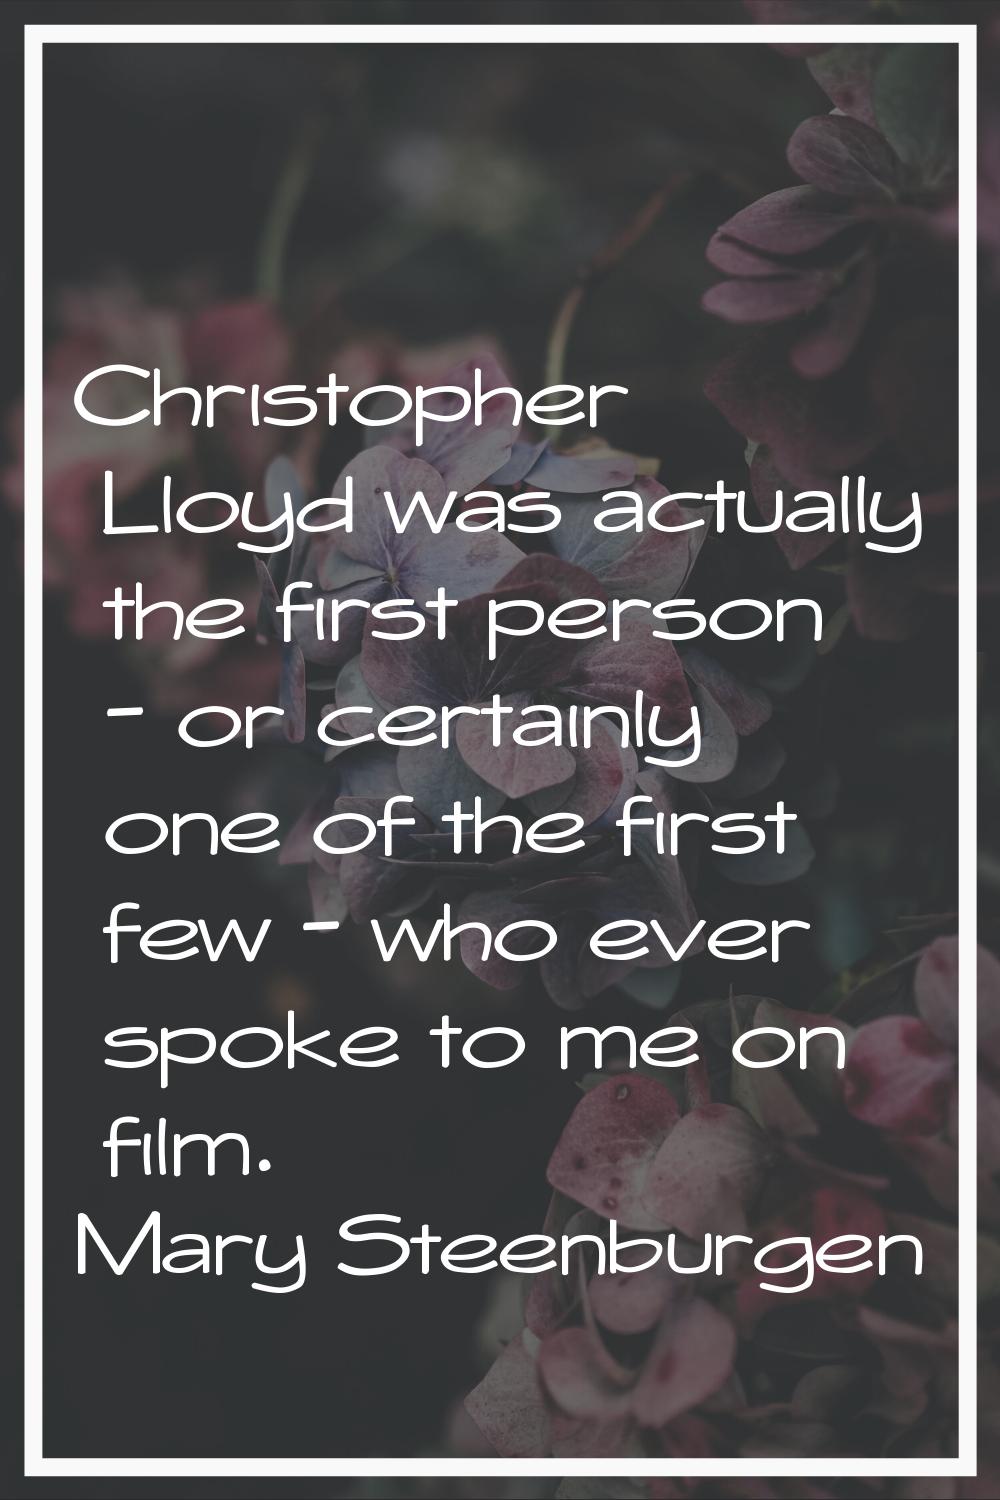 Christopher Lloyd was actually the first person - or certainly one of the first few - who ever spok